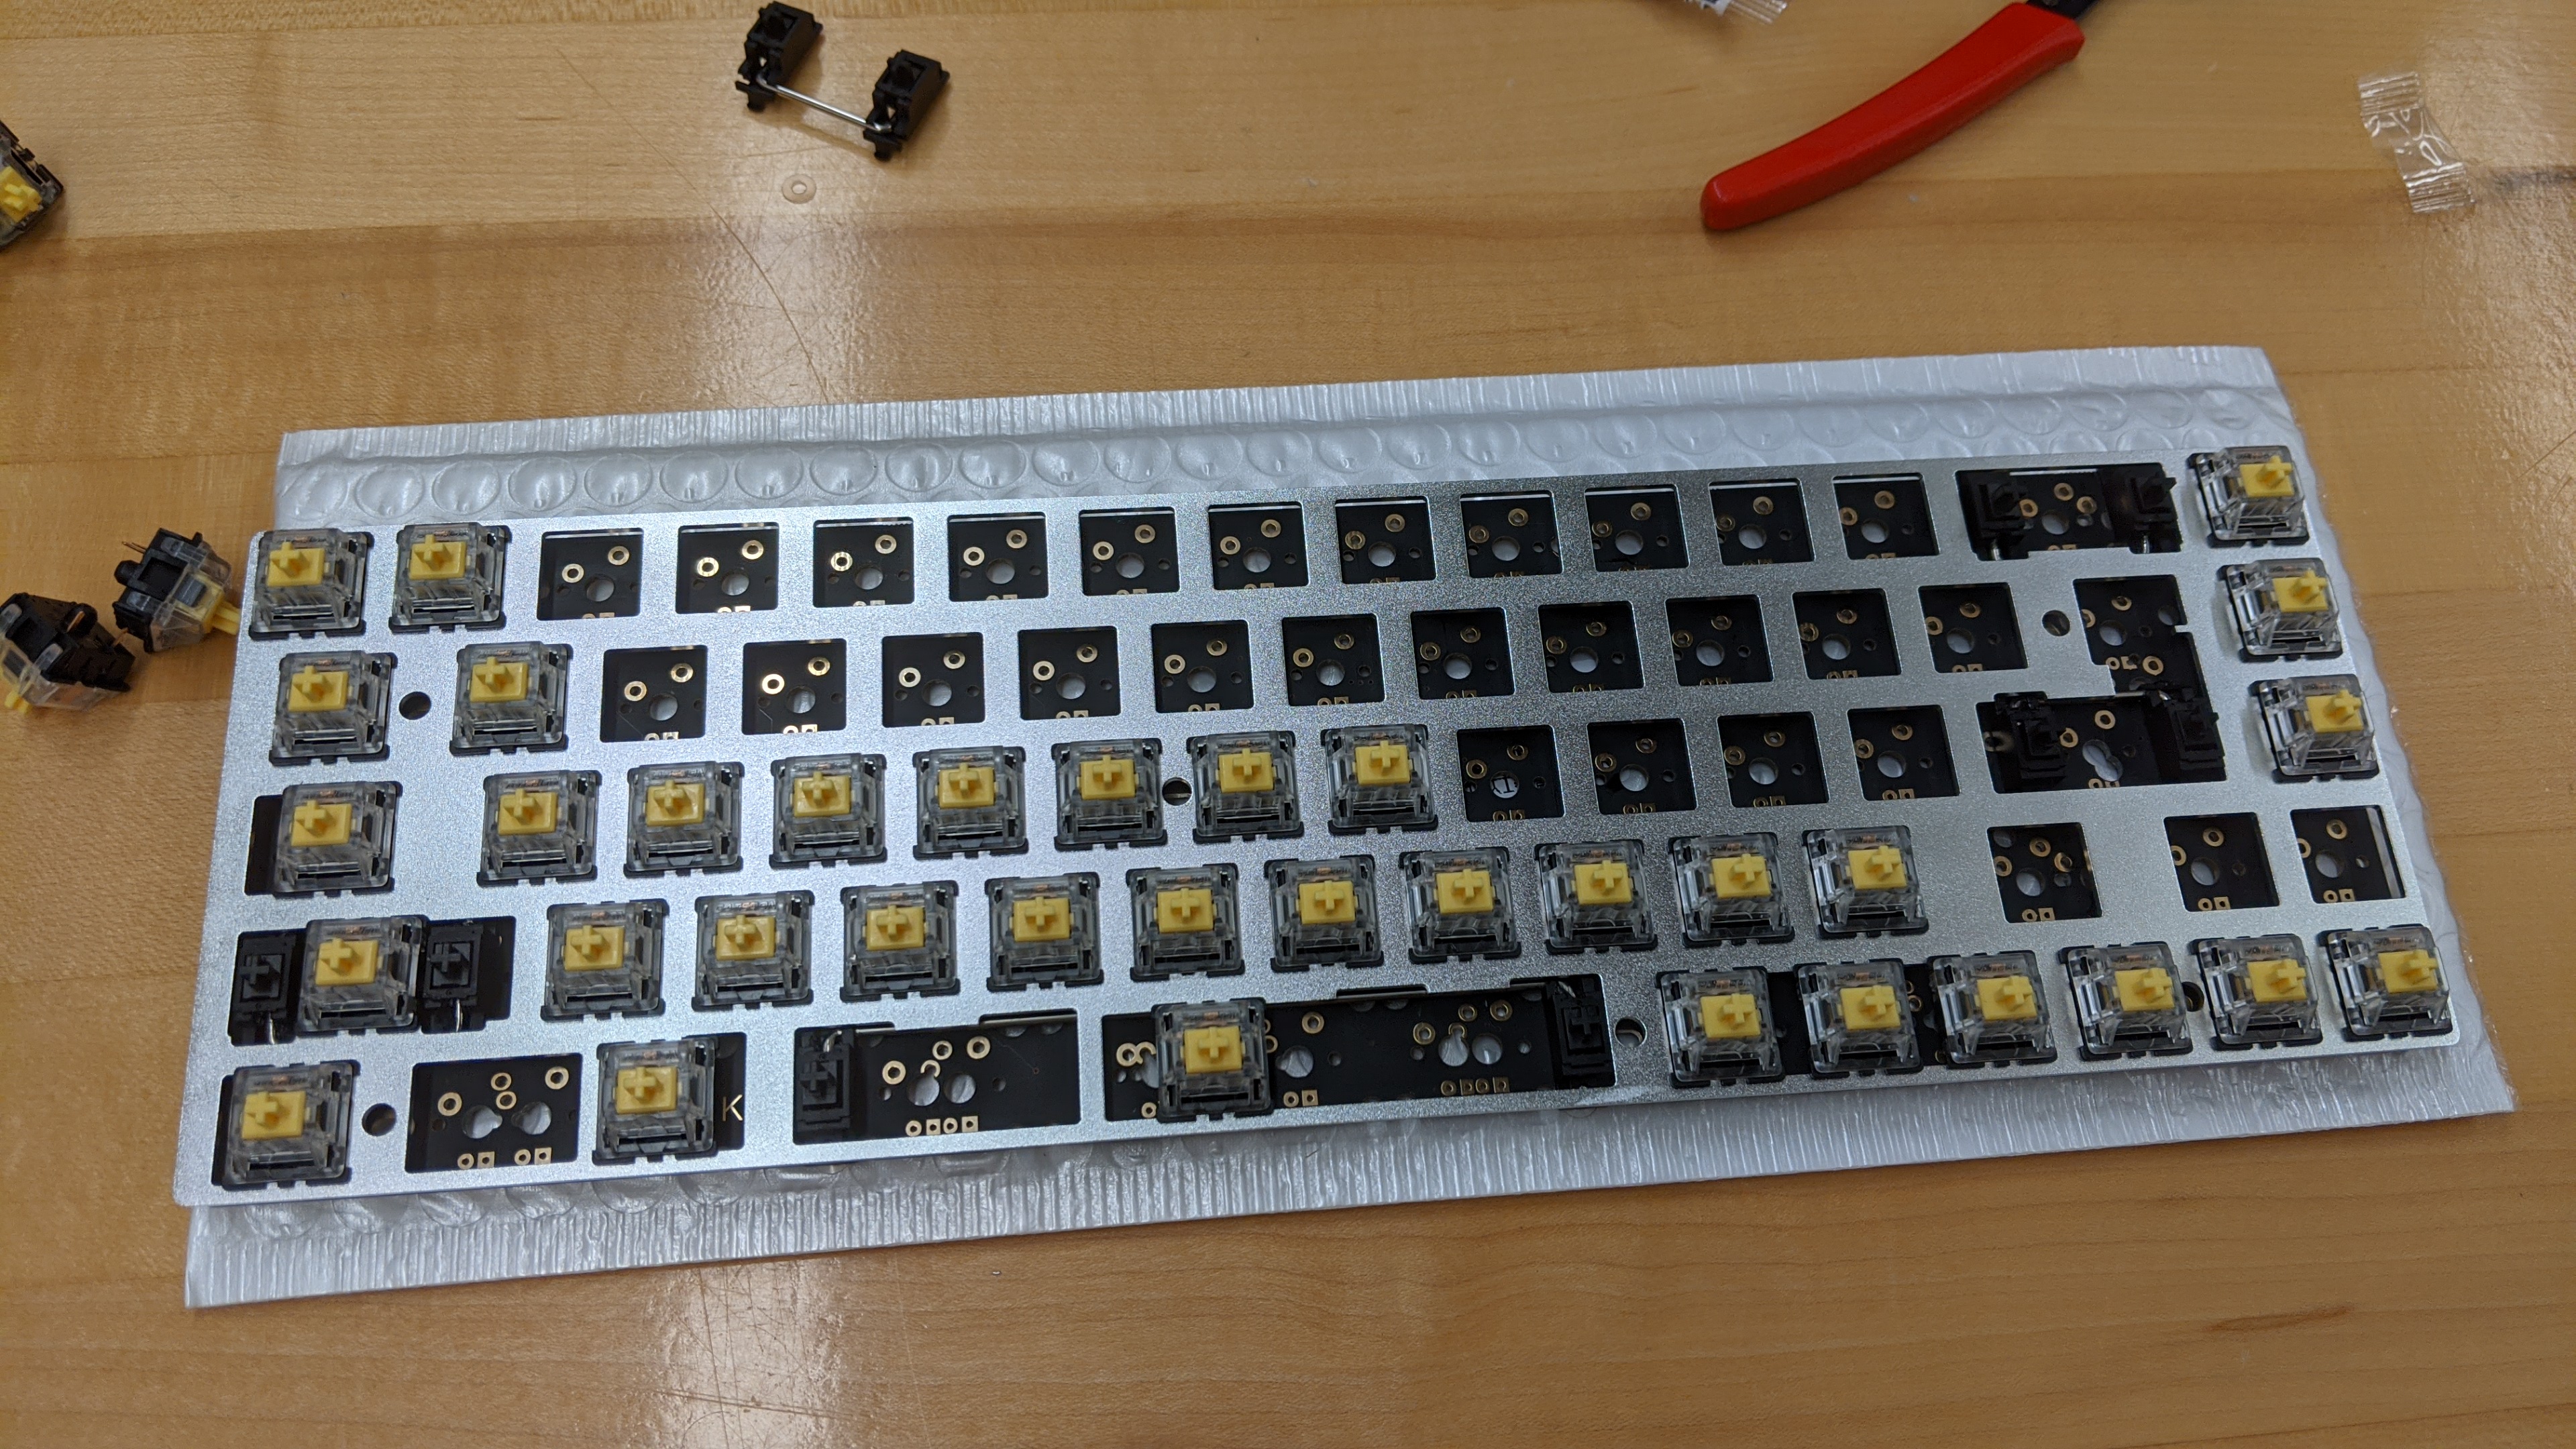 A partially assembled keyboard, sitting on a desk. The circuit board and switches are completely exposed, and it has no case.